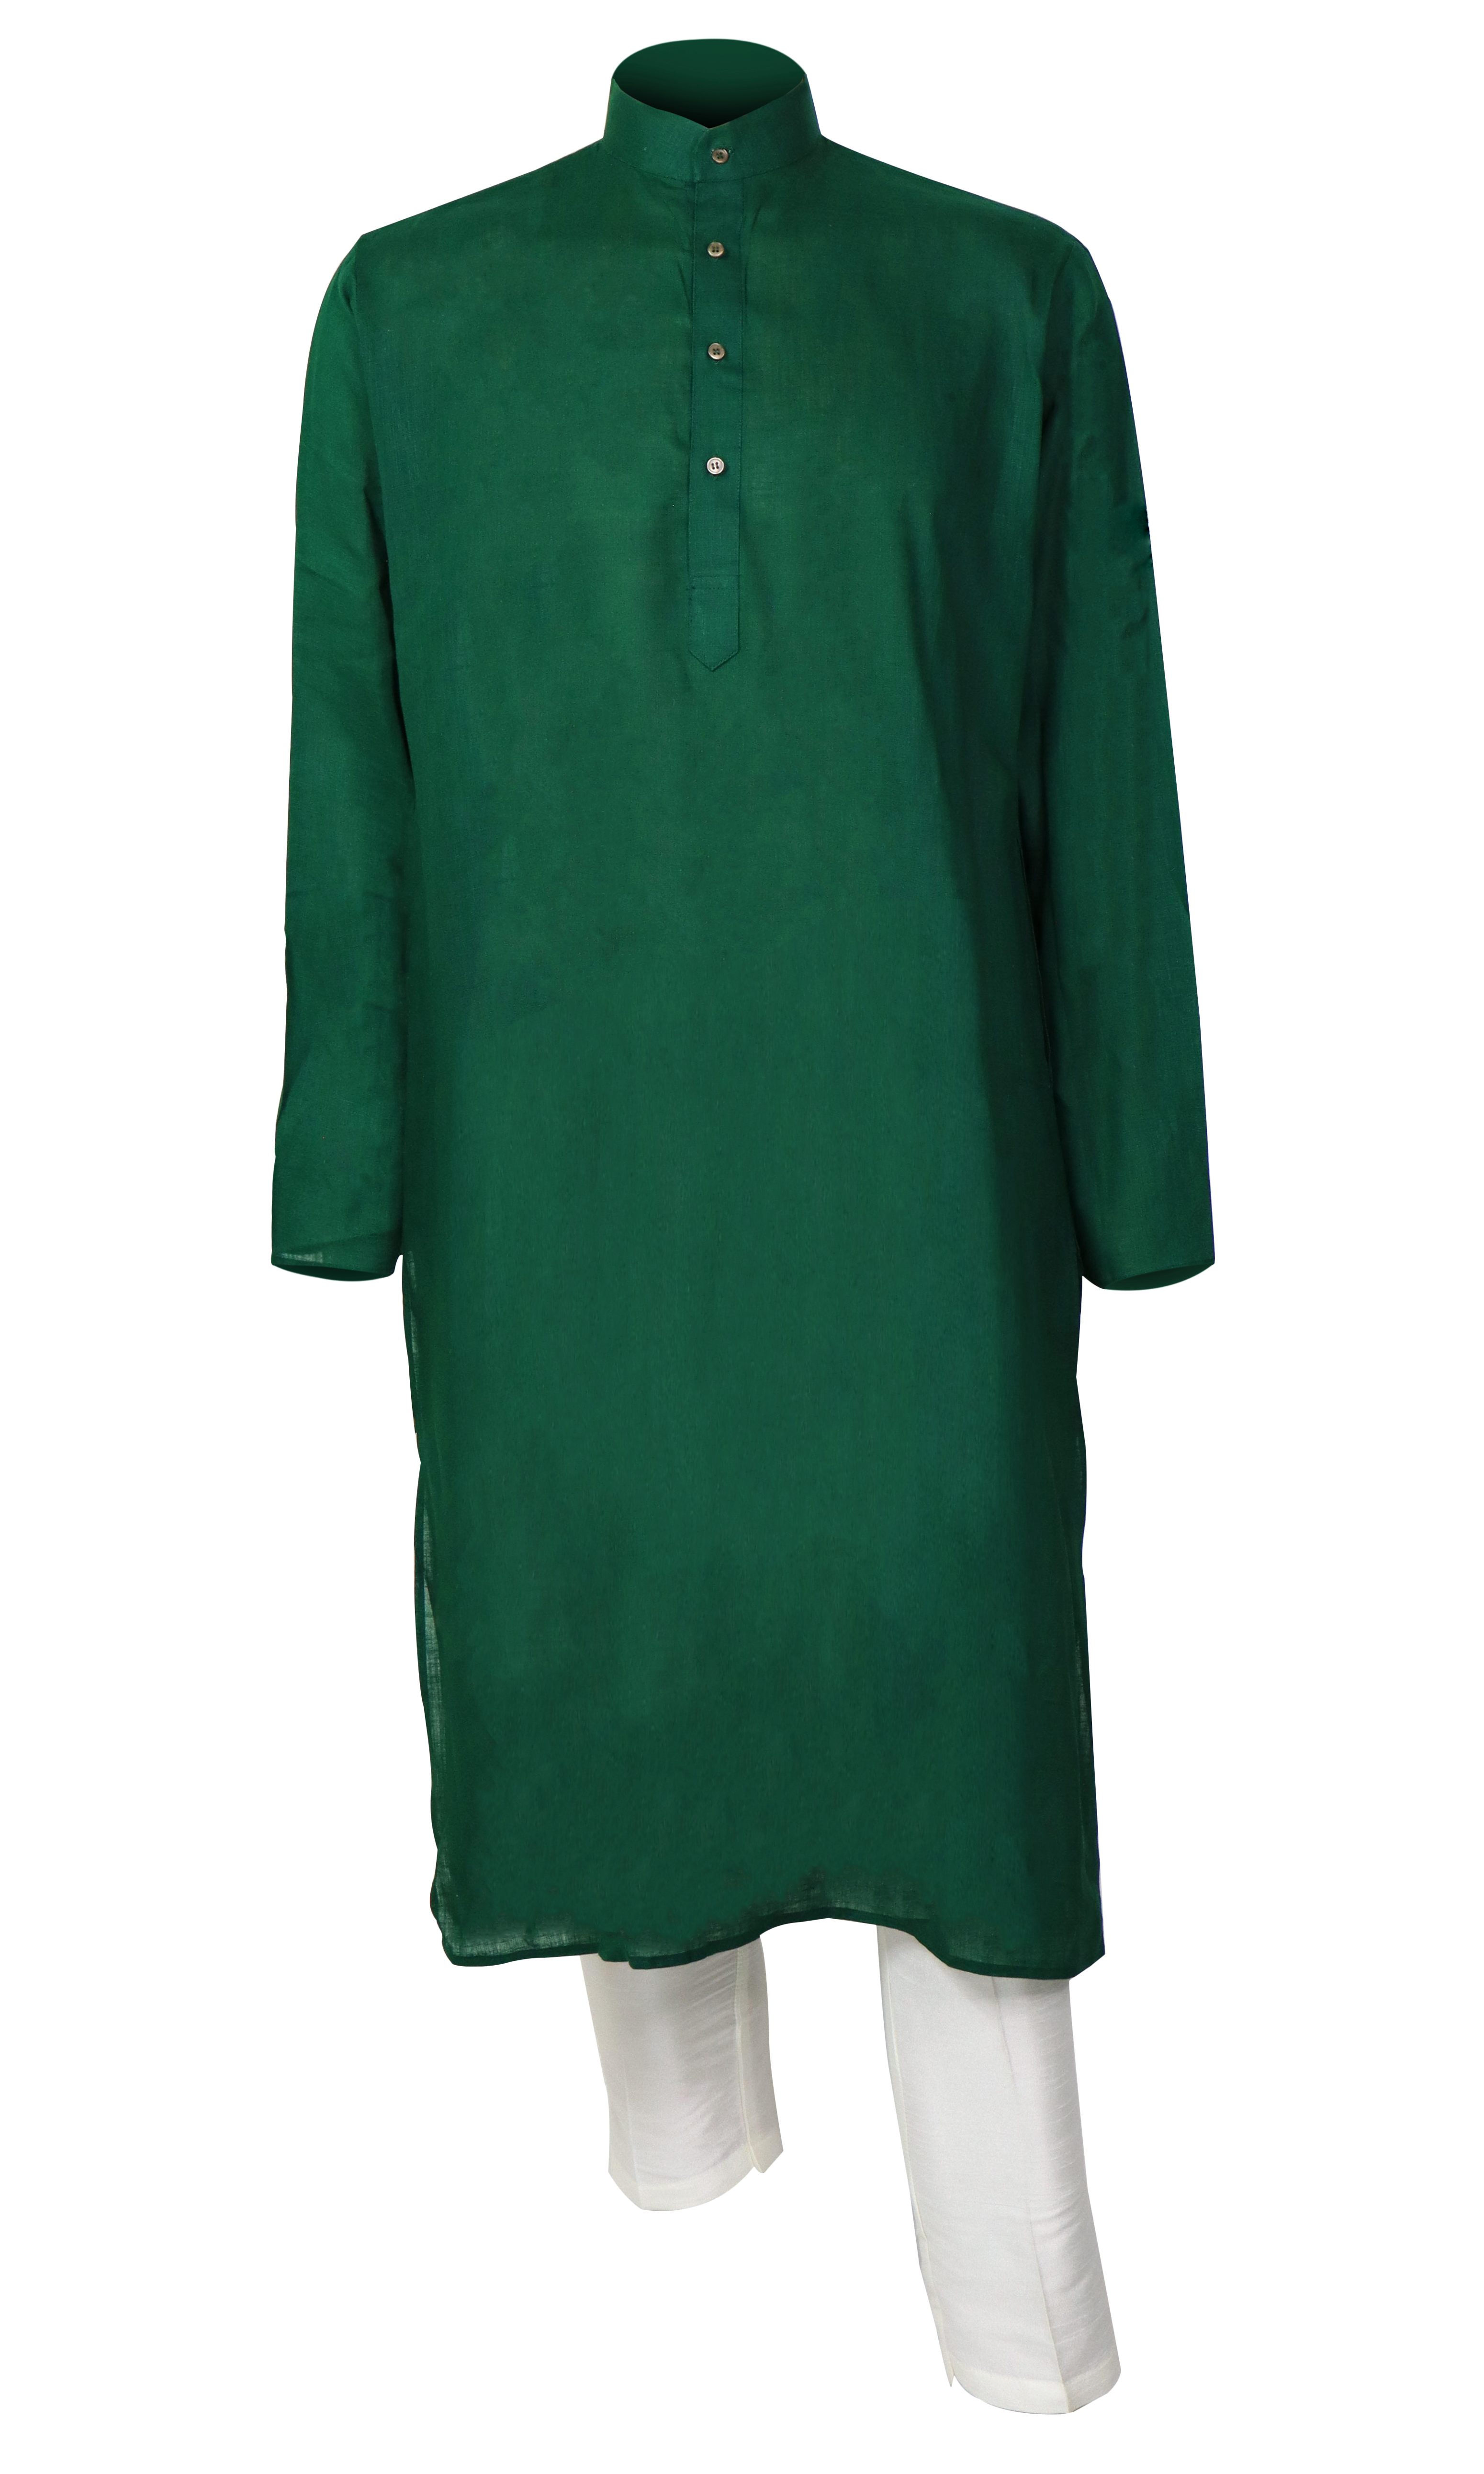 Forest green  kurta paired with a white pants for any traditional occasion.